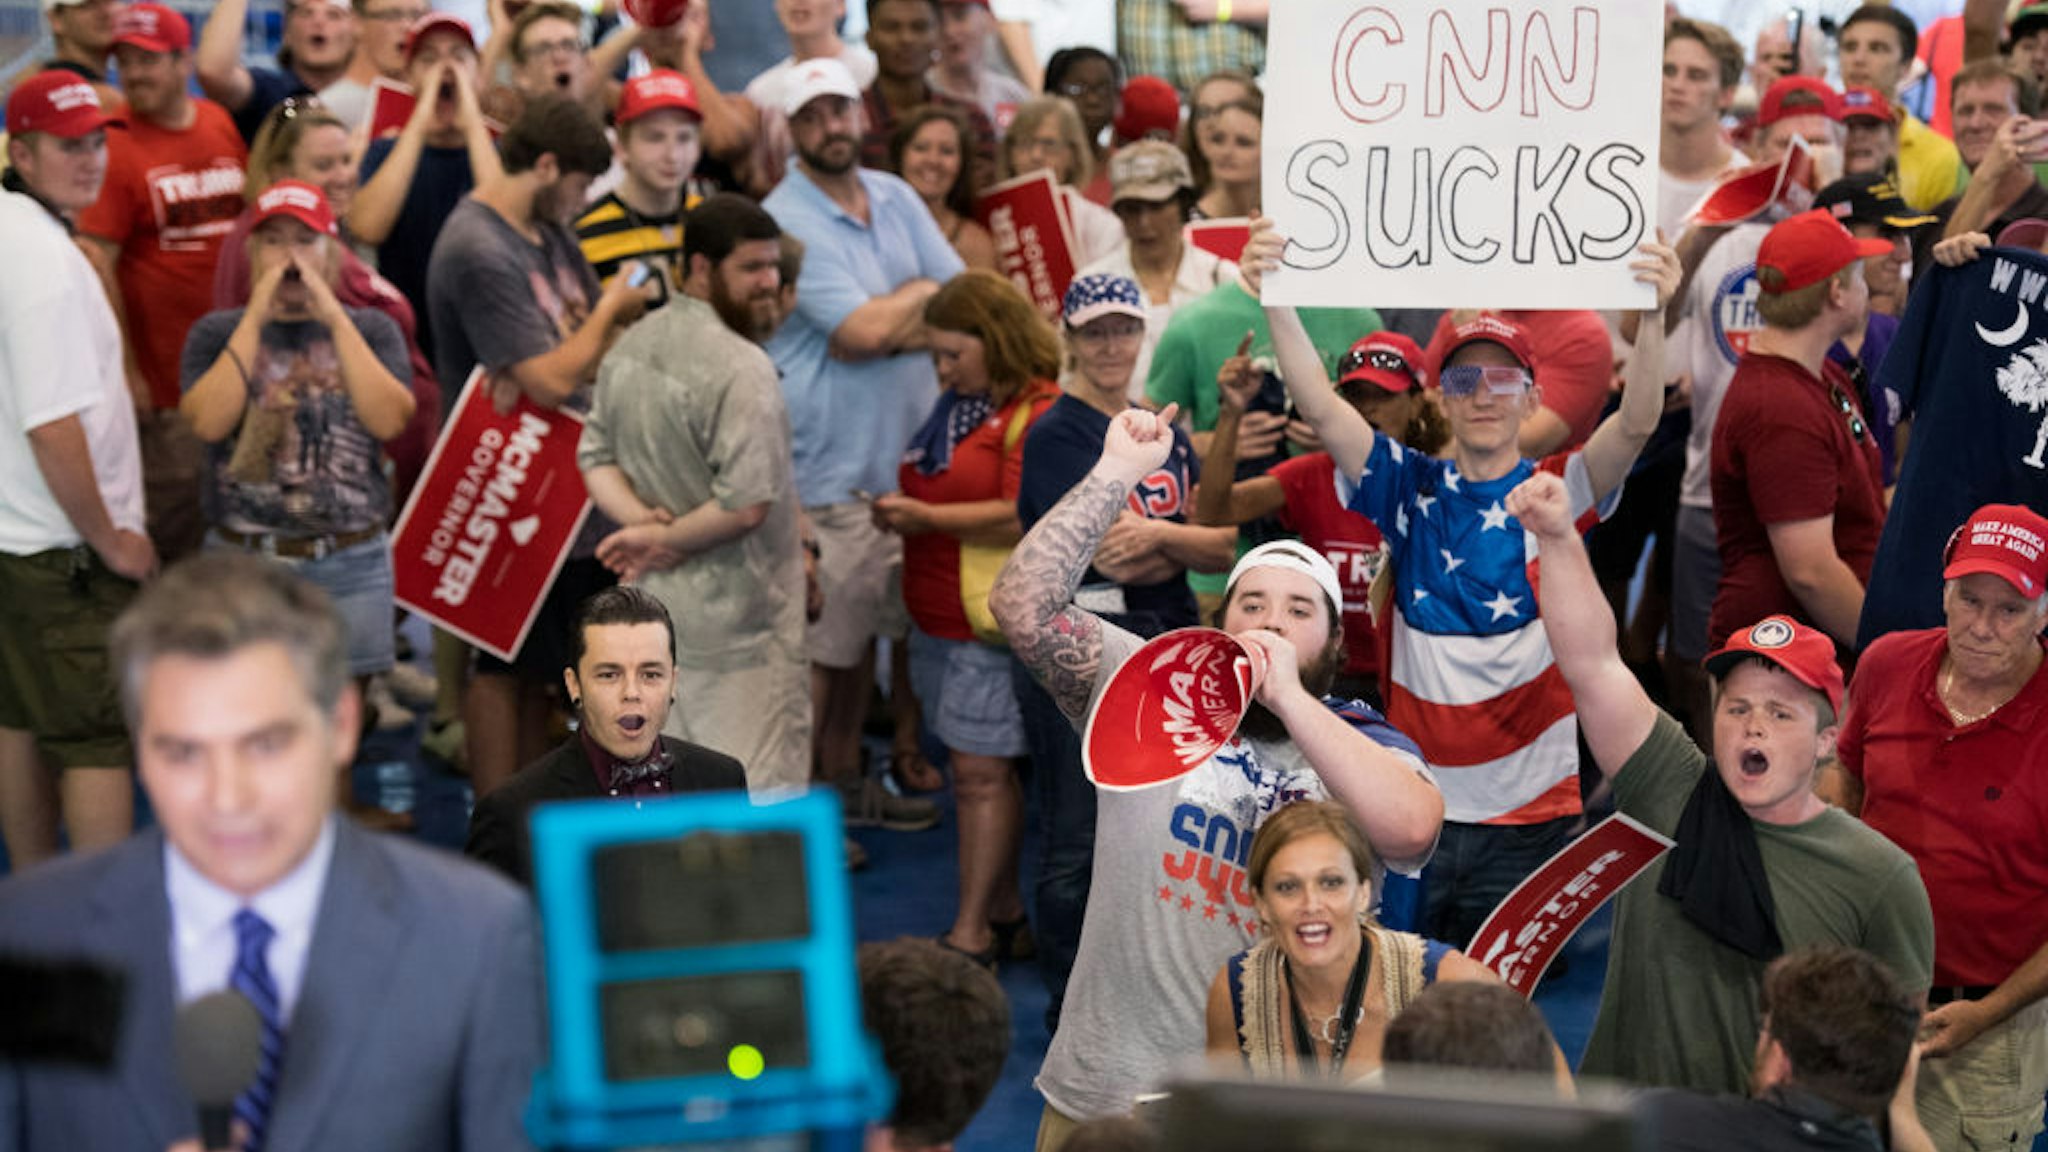 People shout behind CNN reporter Jim Acosta before a campaign rally for South Carolina Governor Henry McMaster featuring President Donald Trump at Airport High School June 25, 2018 in West Columbia, South Carolina. (Photo by Sean Rayford/Getty Images)